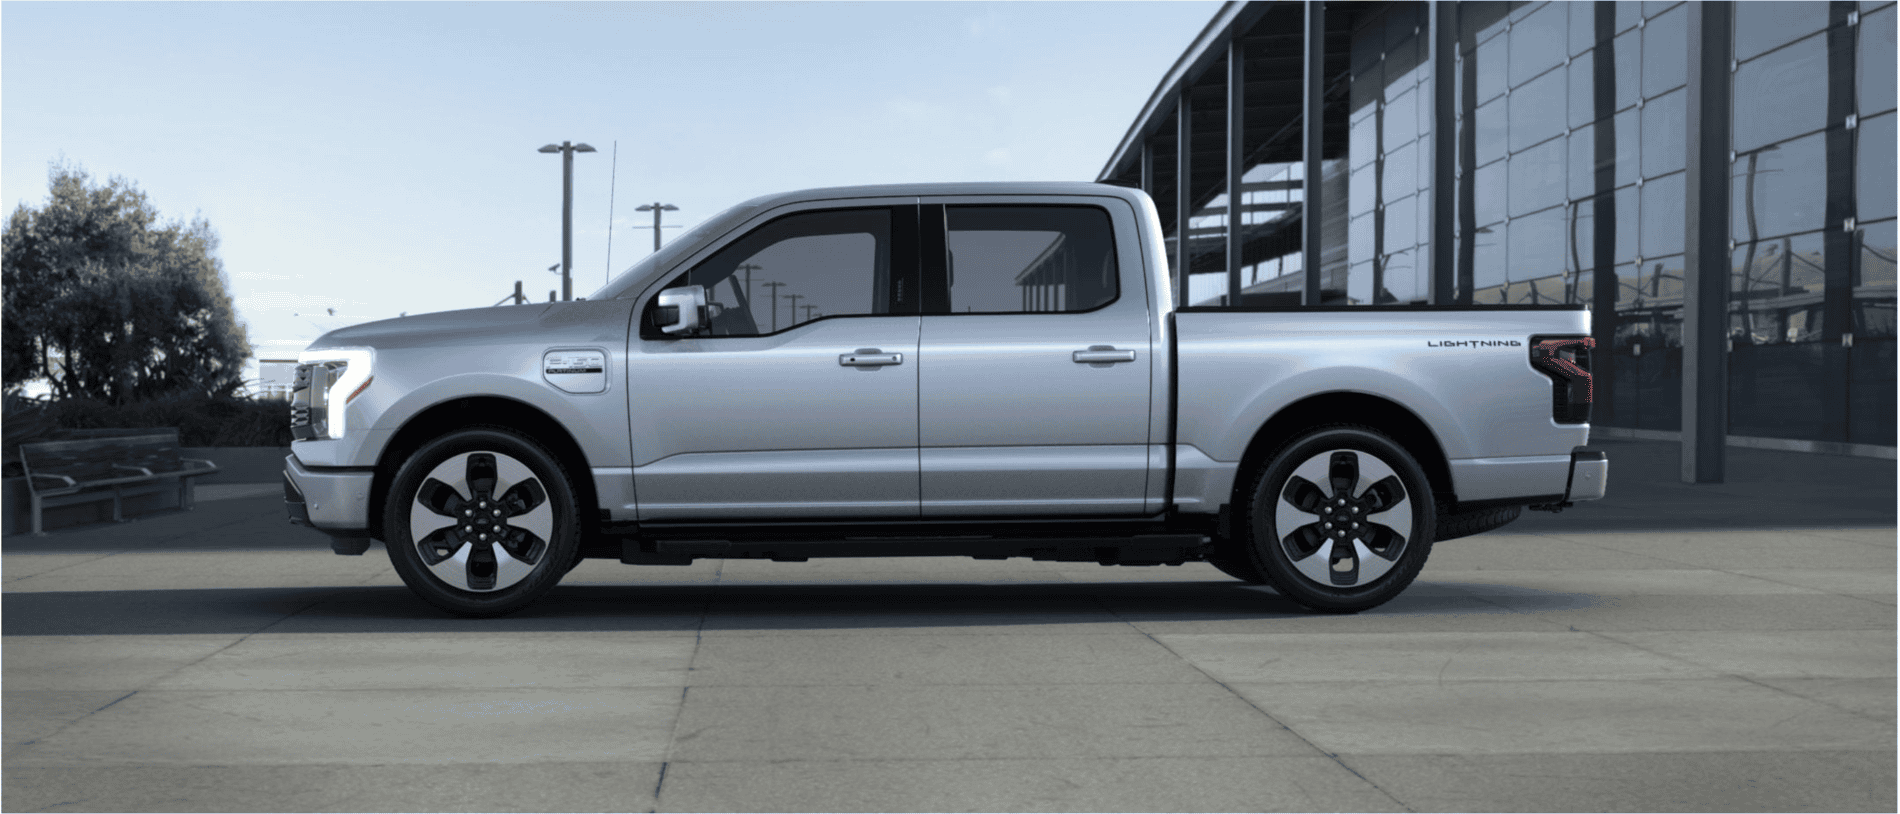 Ford F-150 Lightning Too early to talk colors for 2022 F-150 Lightning? iced-blue-silver-